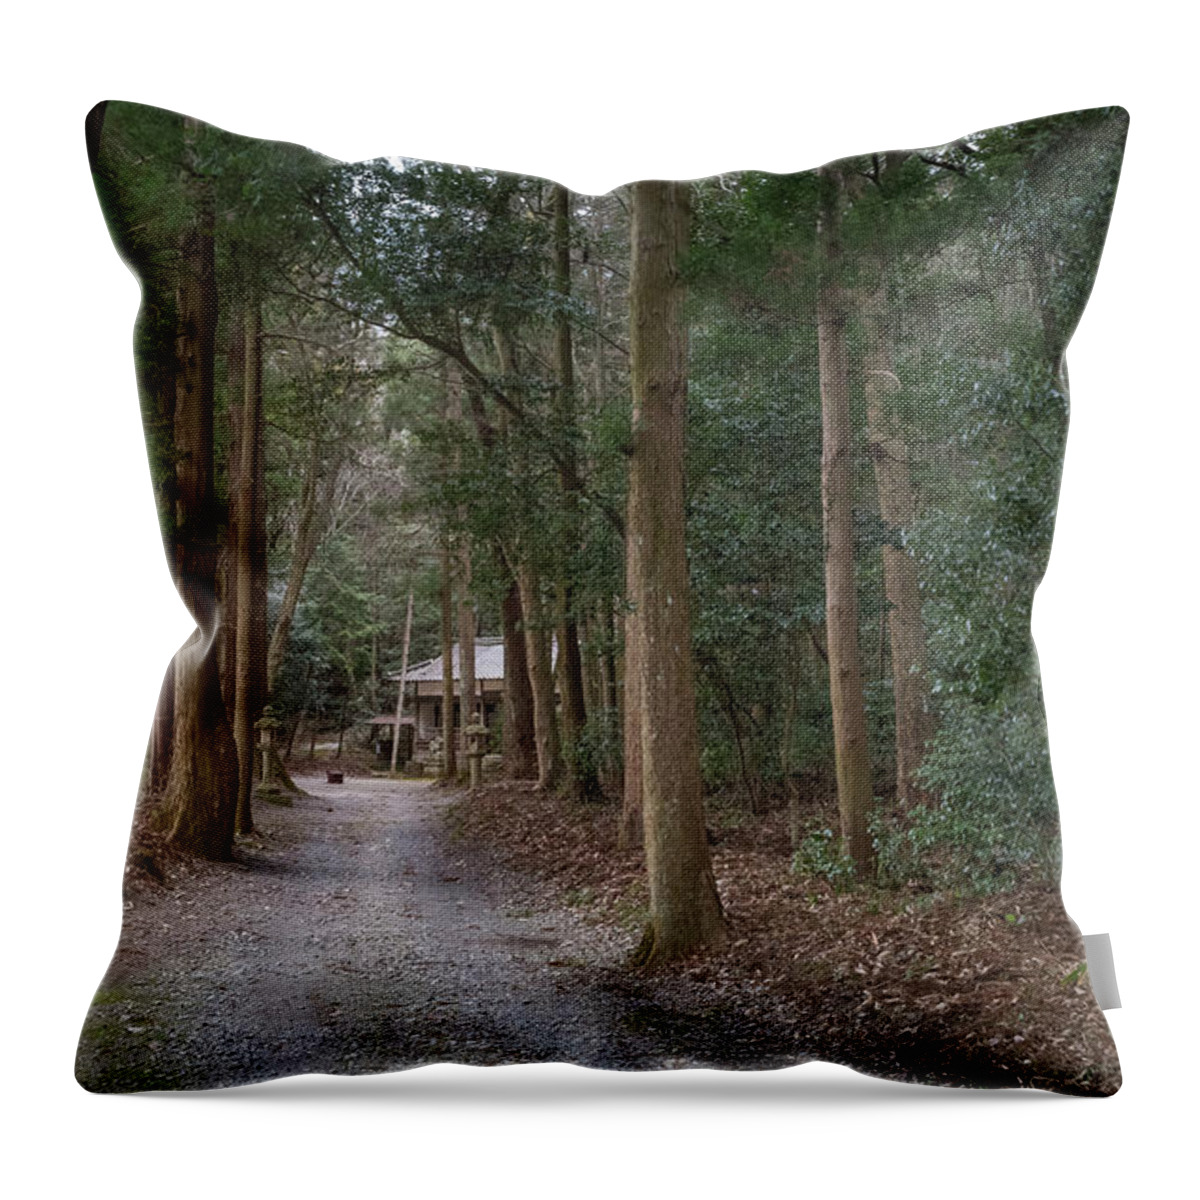 Shrine Throw Pillow featuring the photograph Forrest Shrine, Japan by Perry Rodriguez